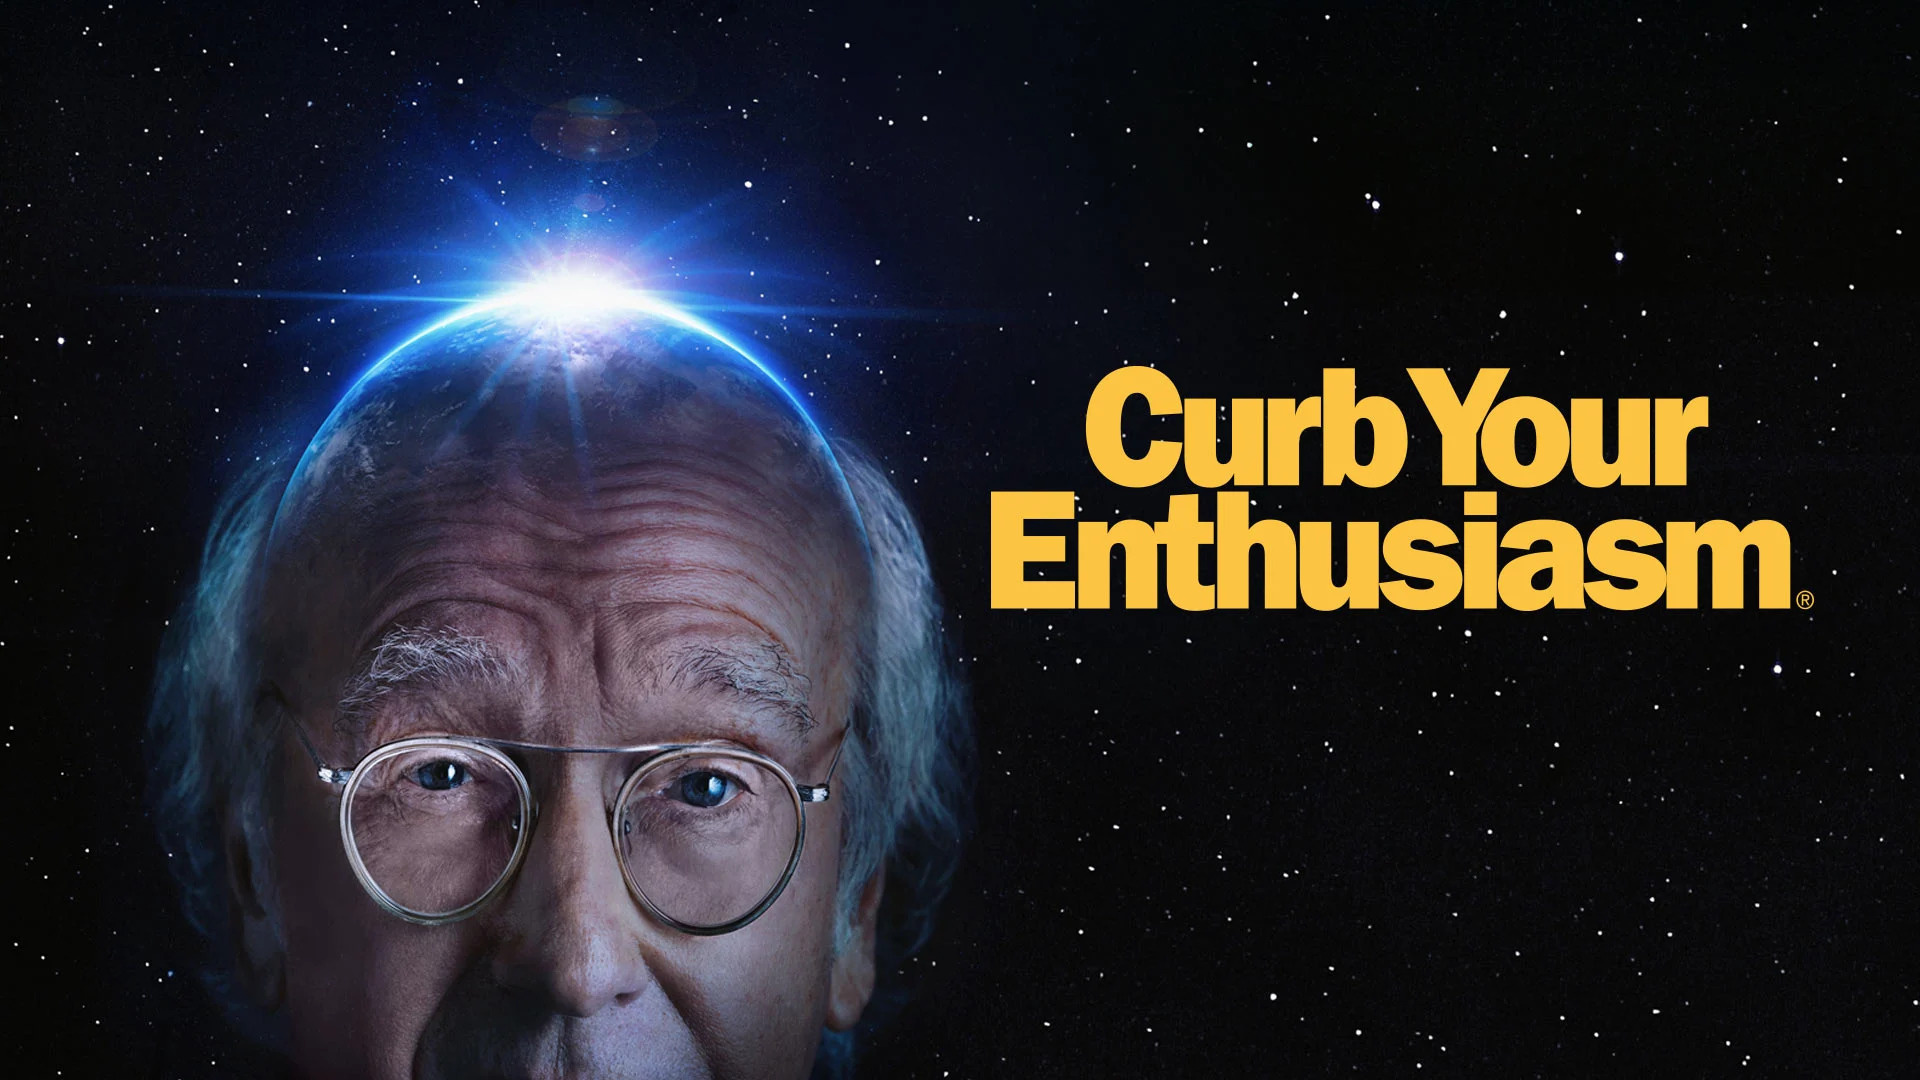 10 Best Shows Like 'Curb Your Enthusiasm' To Watch While Waiting For the New Season - Cinemablind 1920x1080